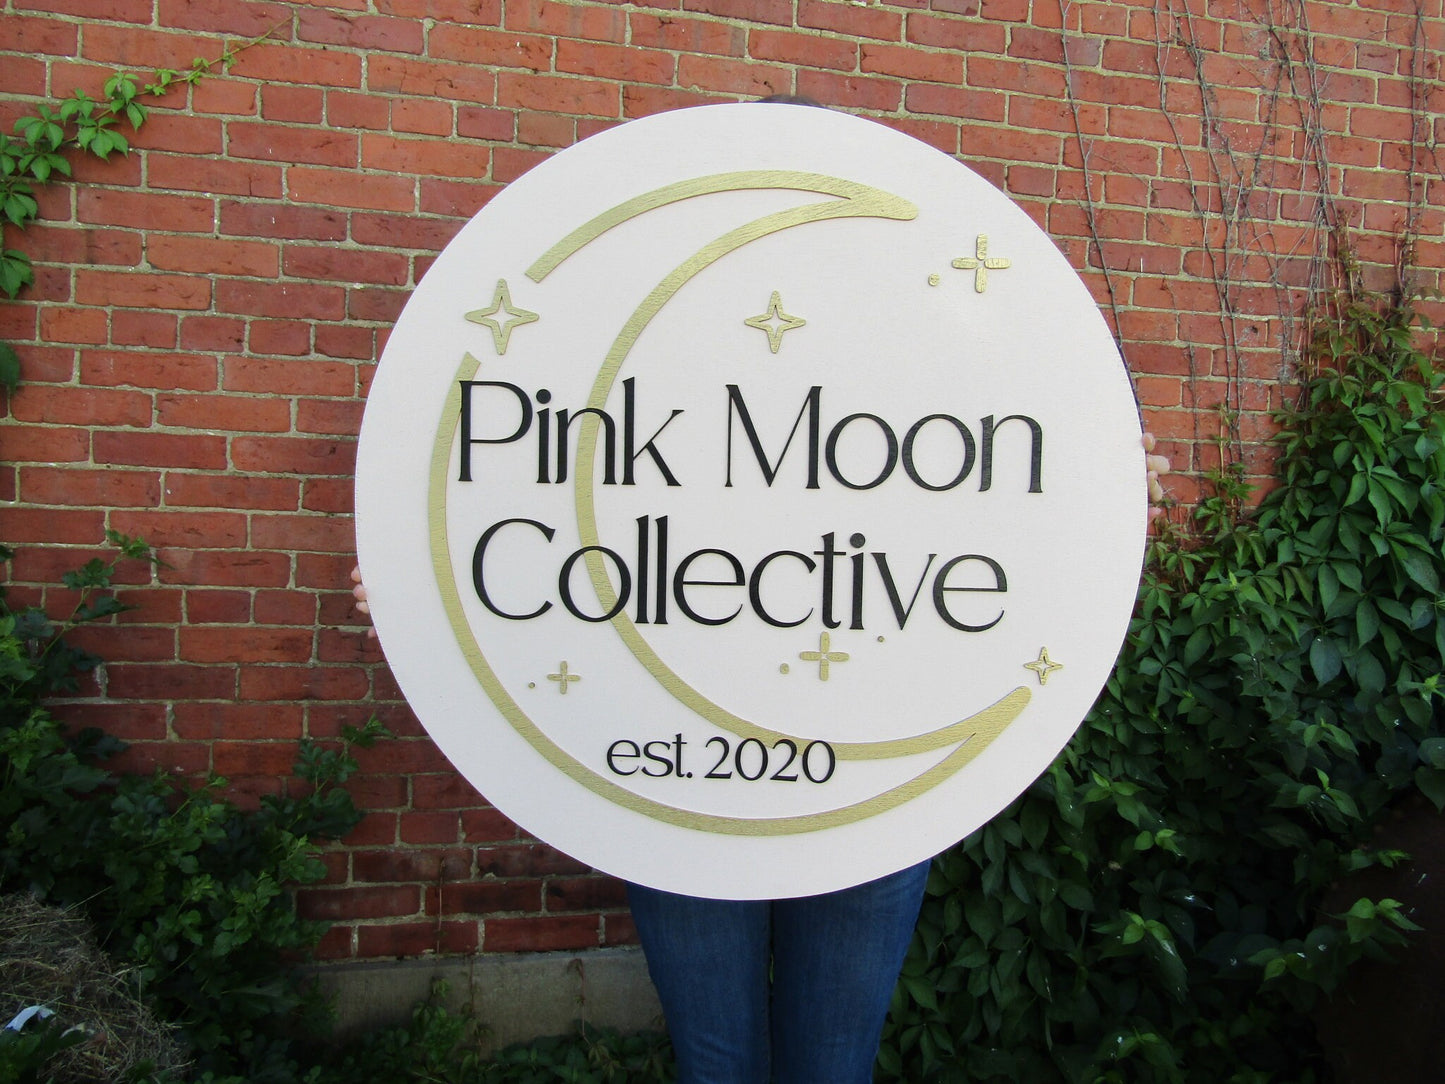 Custom Sign Round Business Commerical Signage Minimalist Made to Order Pink Moon Store Front Small Shop Logo Moon Circle Wooden Handmade